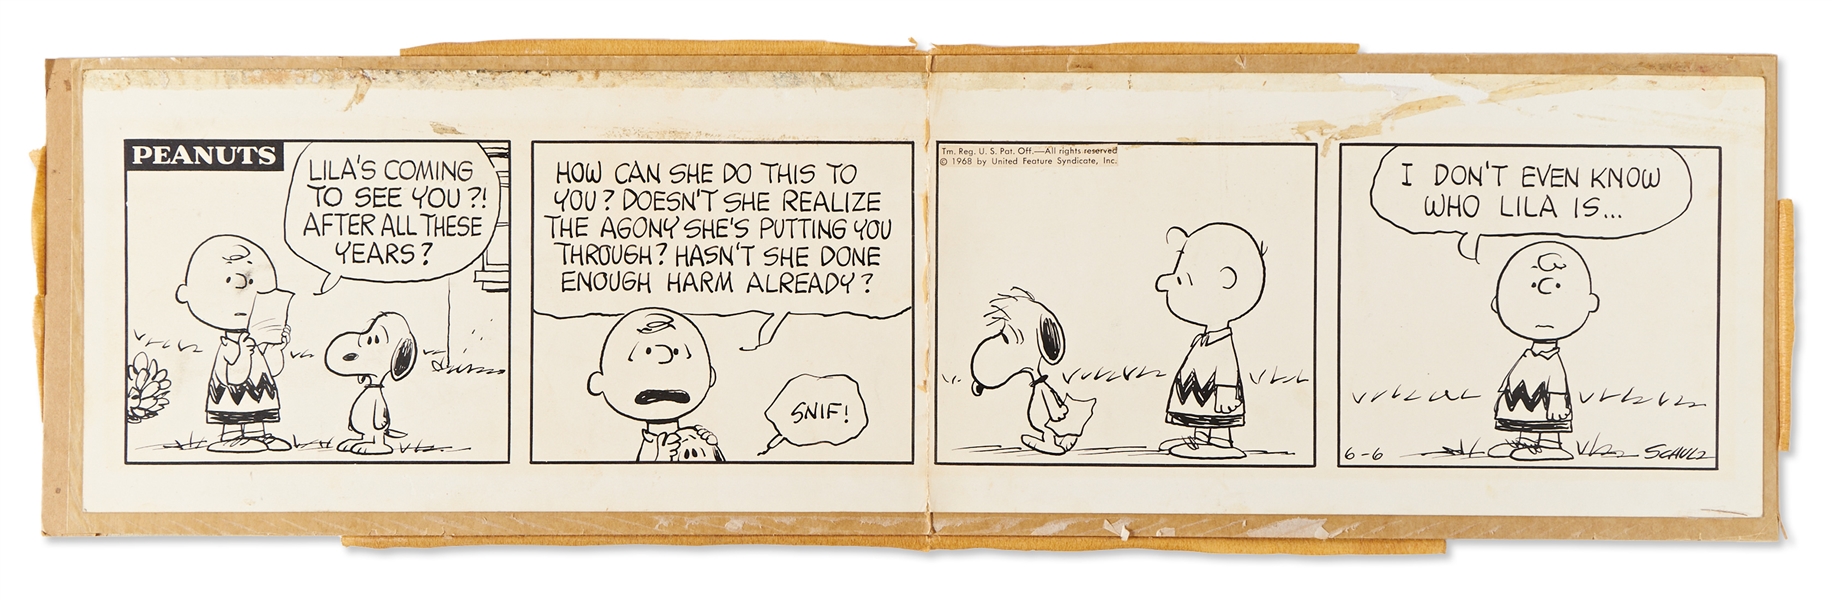 Original ''Peanuts'' Comic Strip Hand-Drawn by Charles Schulz -- Snoopy Is Distraught Over a Visit from Lila, His Original Owner Before Charlie Brown!